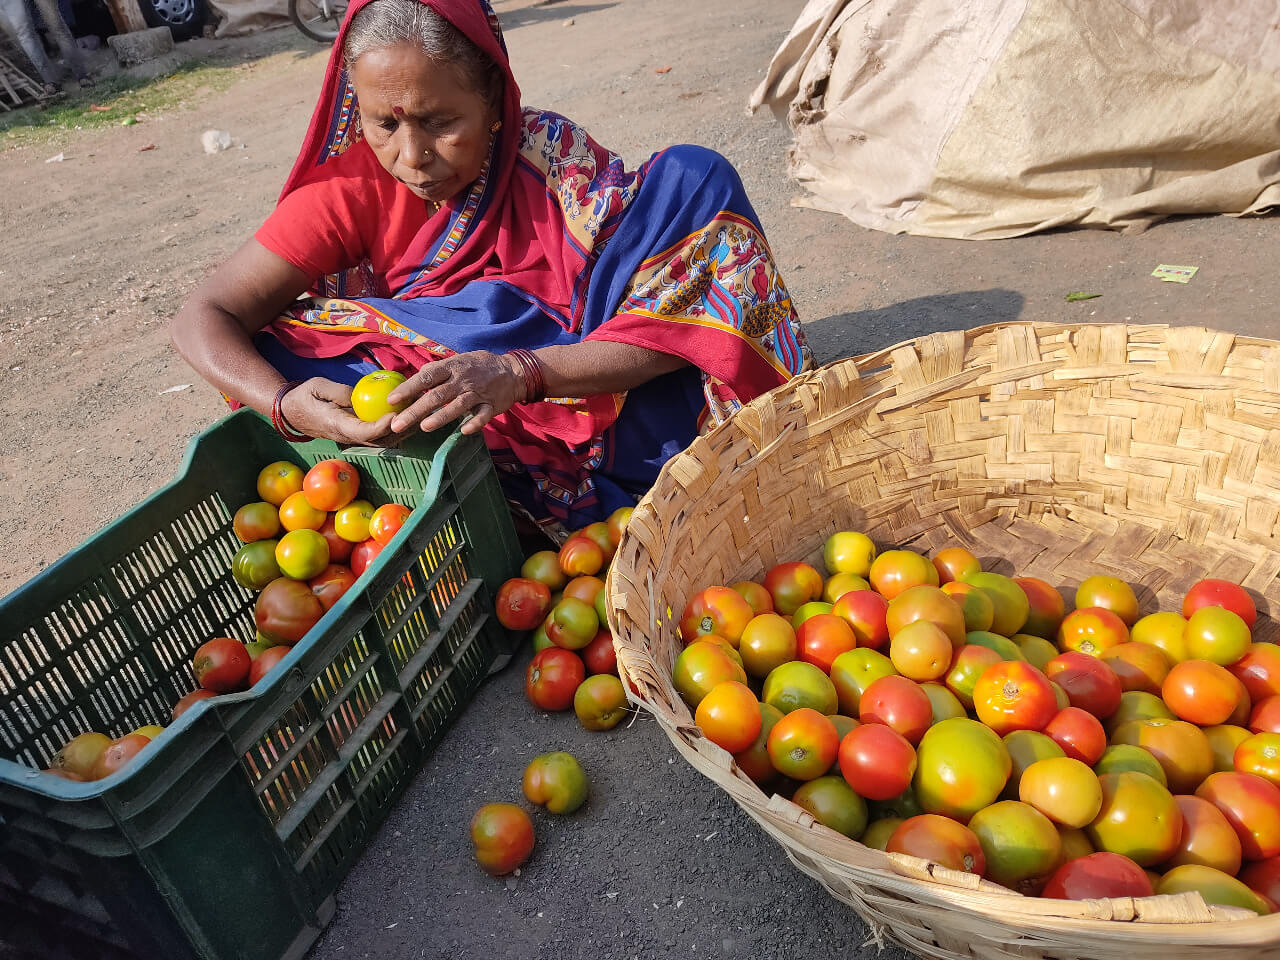 Growing tomatoes is often a gamble even for well-informed, progressive farmers, due to high input costs, sensitivity to climatic variations such as frost, rainfall, temperature, the perishable nature of the crop, and uncertain market returns.